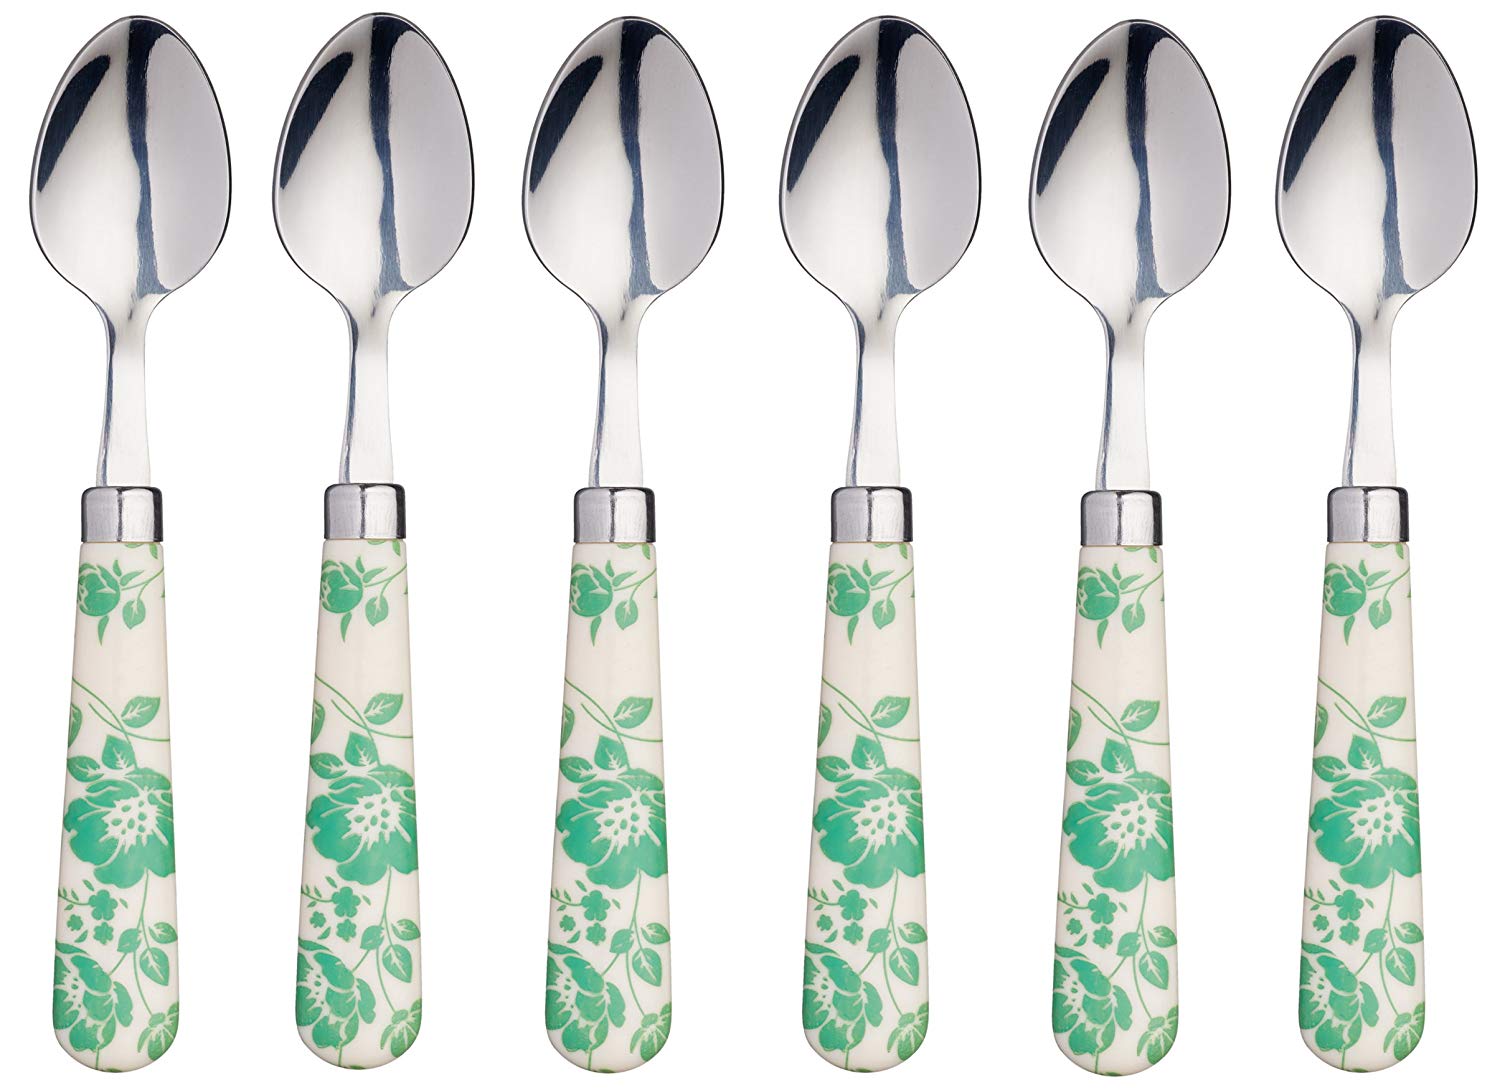 6 KitchenCraft Coloured Flower-Patterned Stainless Steel Teaspoons - Green 15.5 cm Set of 6